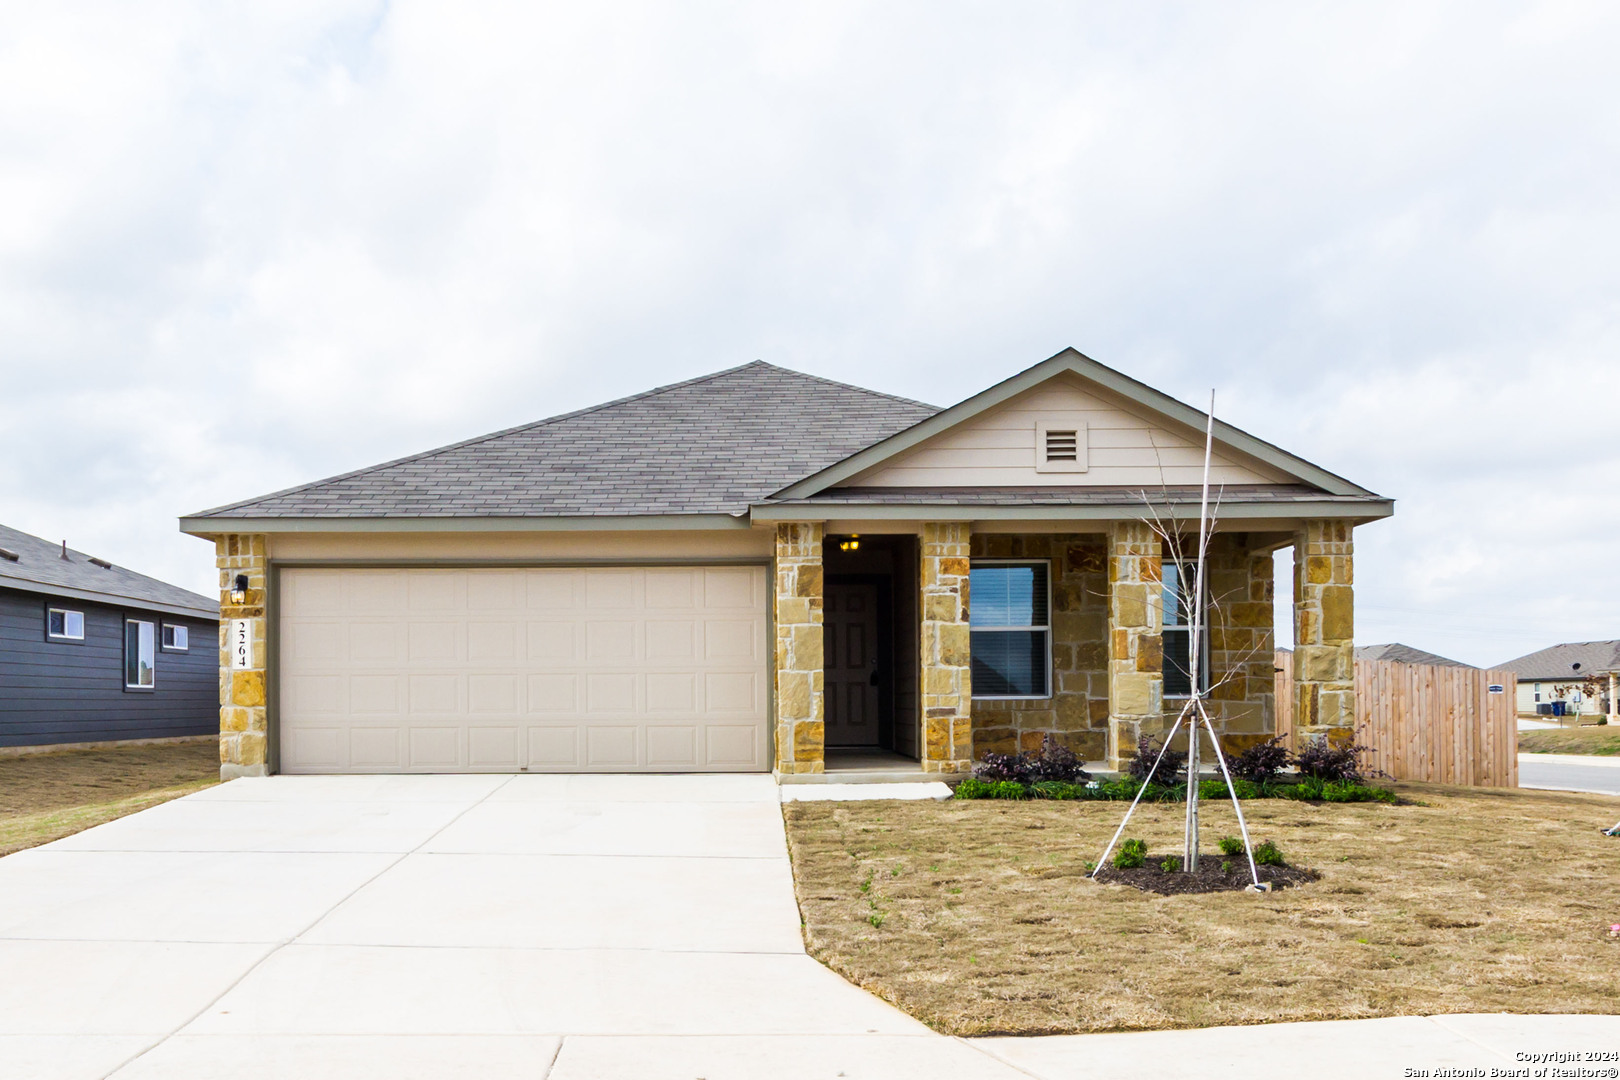 Photo of 2264 Olive Hill Dr in New Braunfels, TX